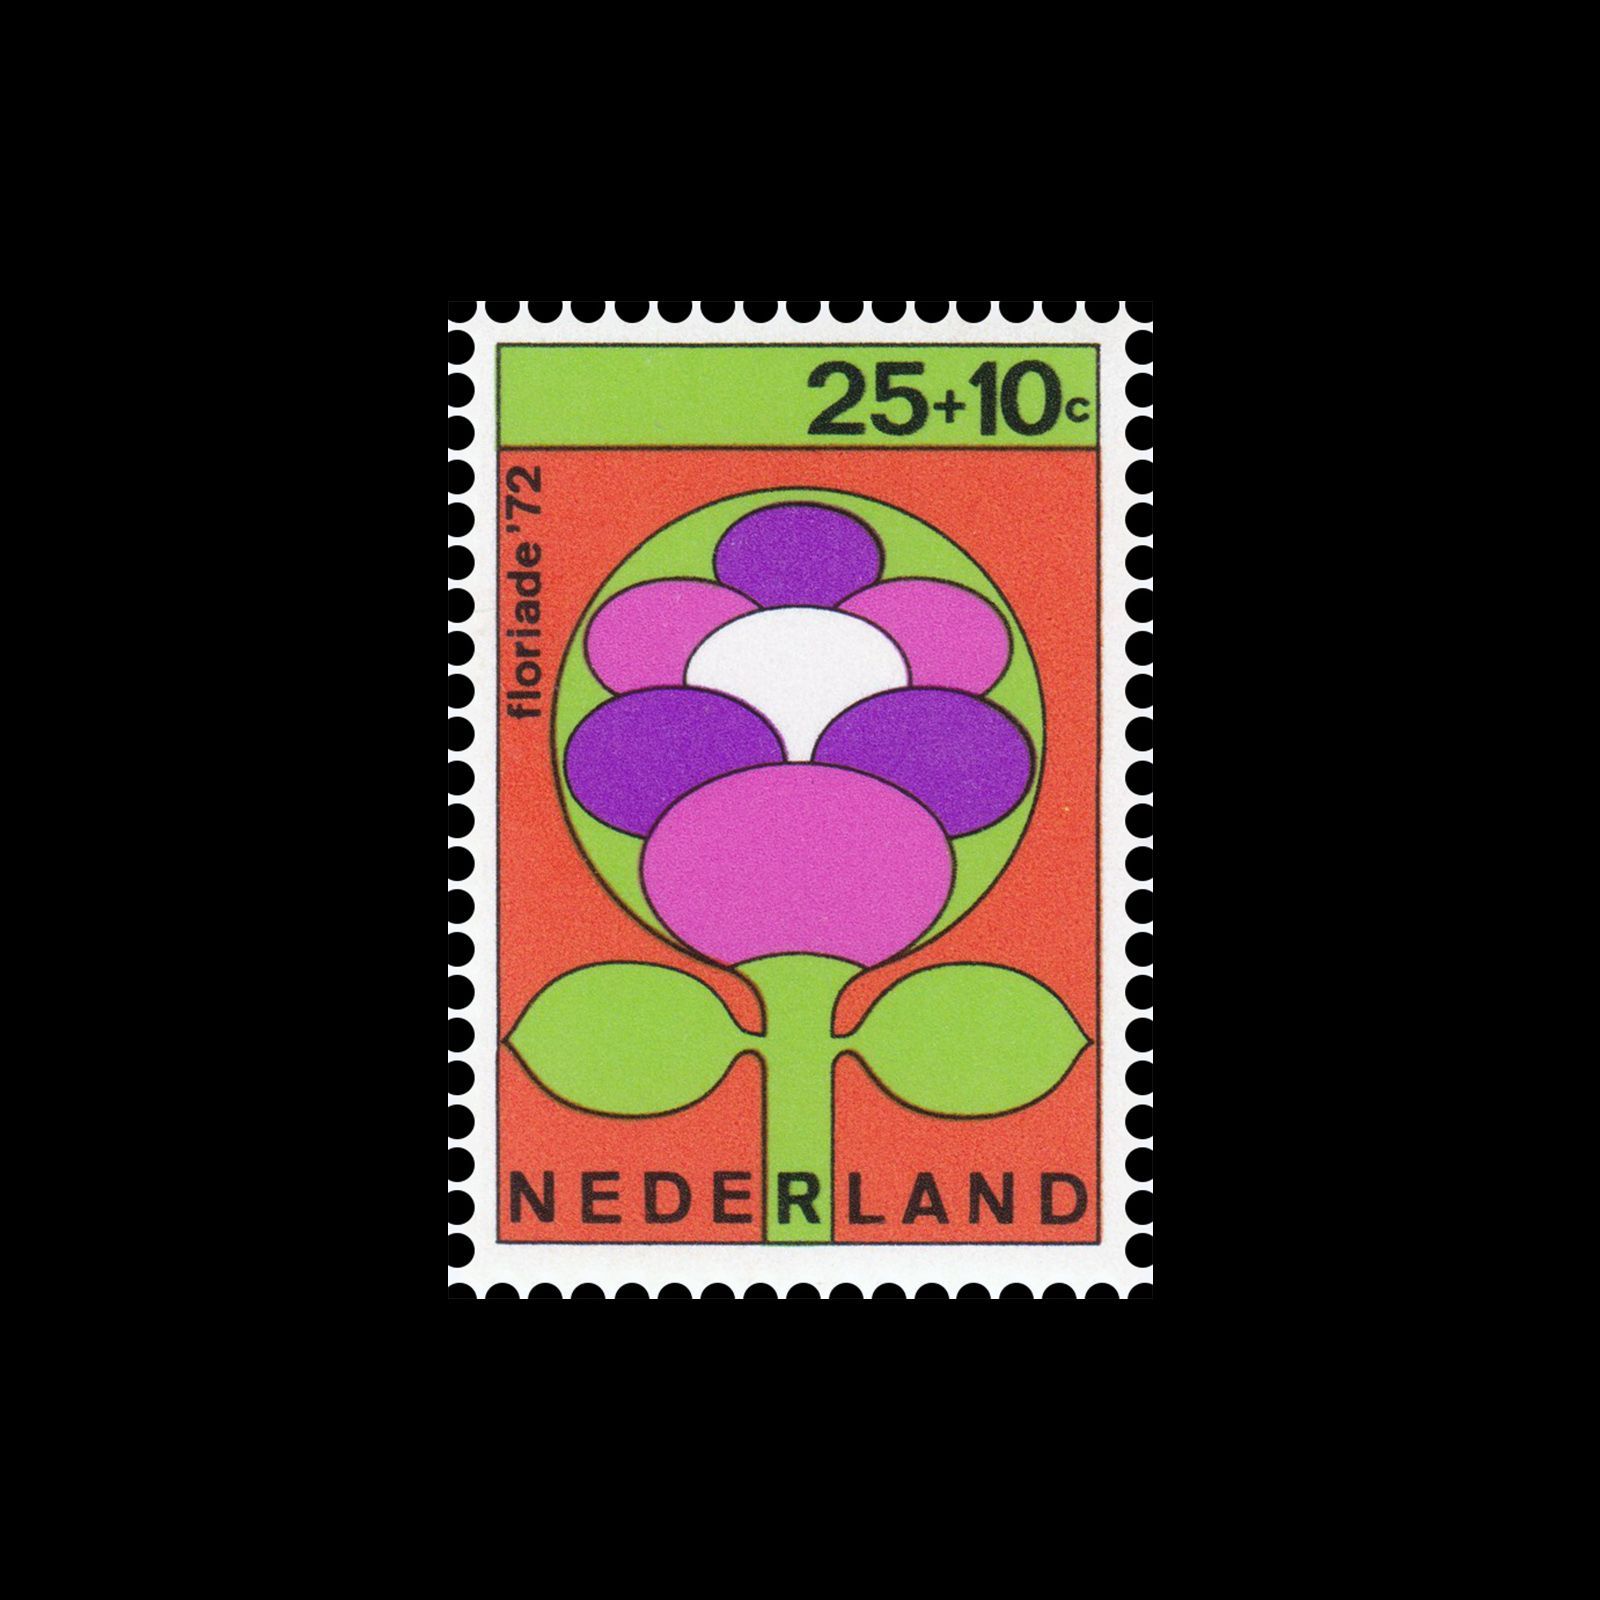 Holland Festival 72 / Floriade 72, Netherland Stamps, 1972. Designed by Dick Elffers 